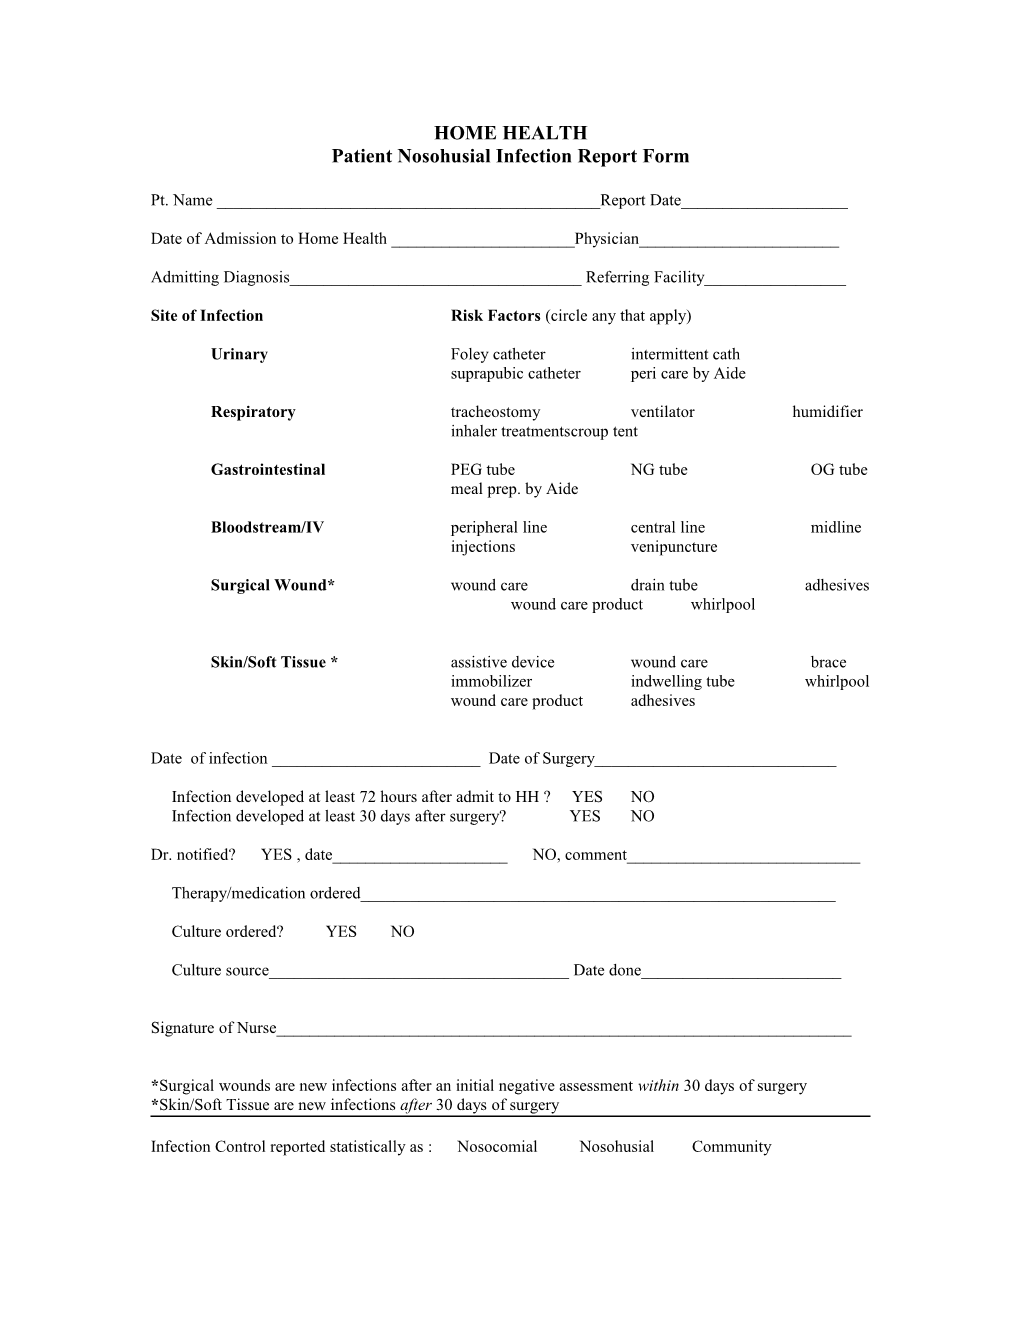 Patient Nosohusial Infection Report Form